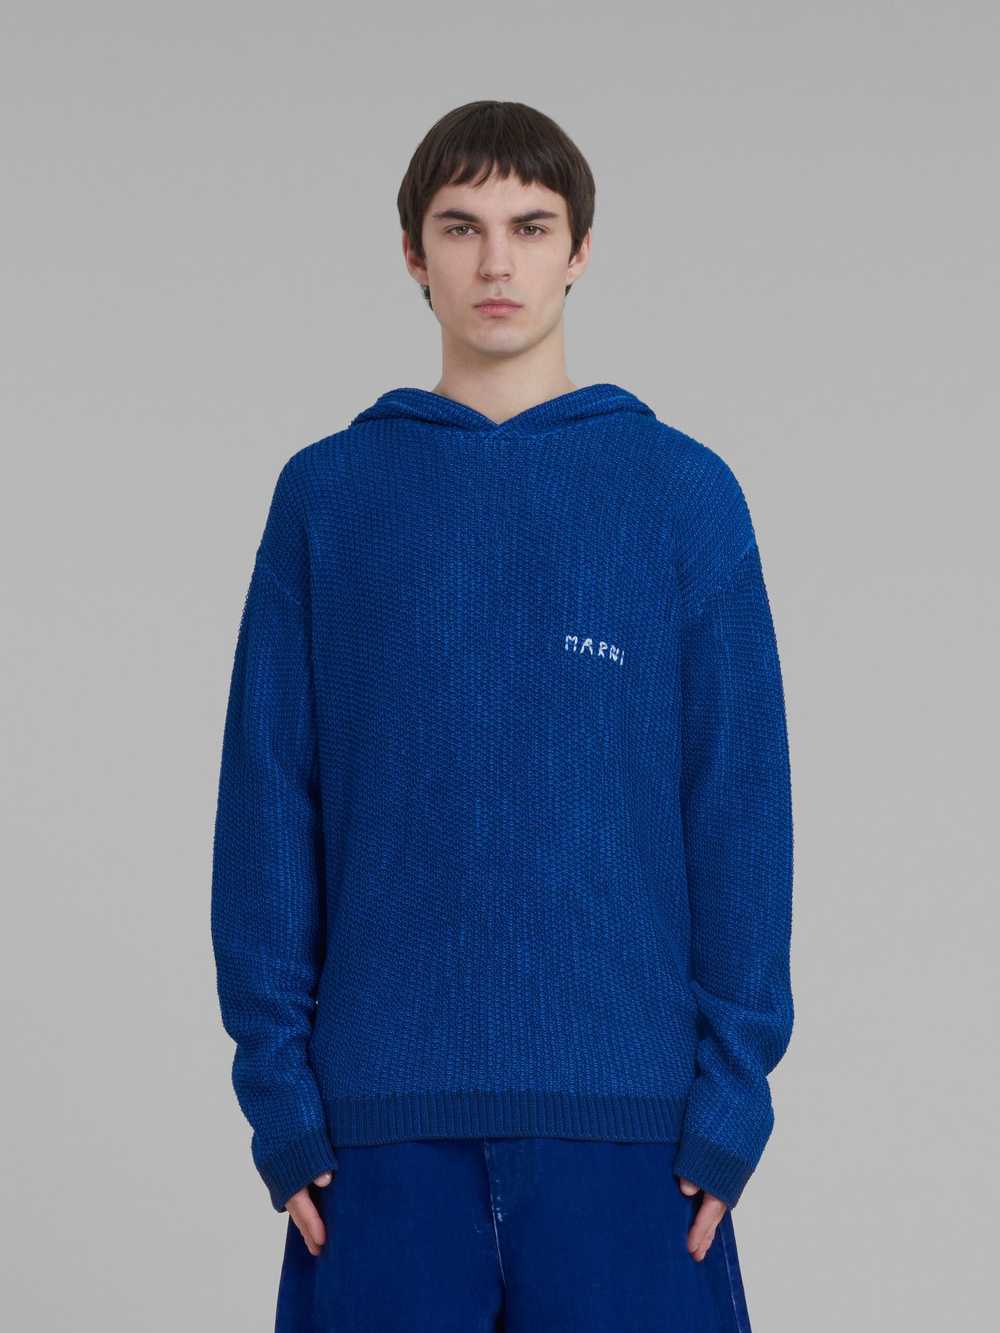 Marni o1w1db10524 Knitted Cotton Hoodie in Blue - image 2